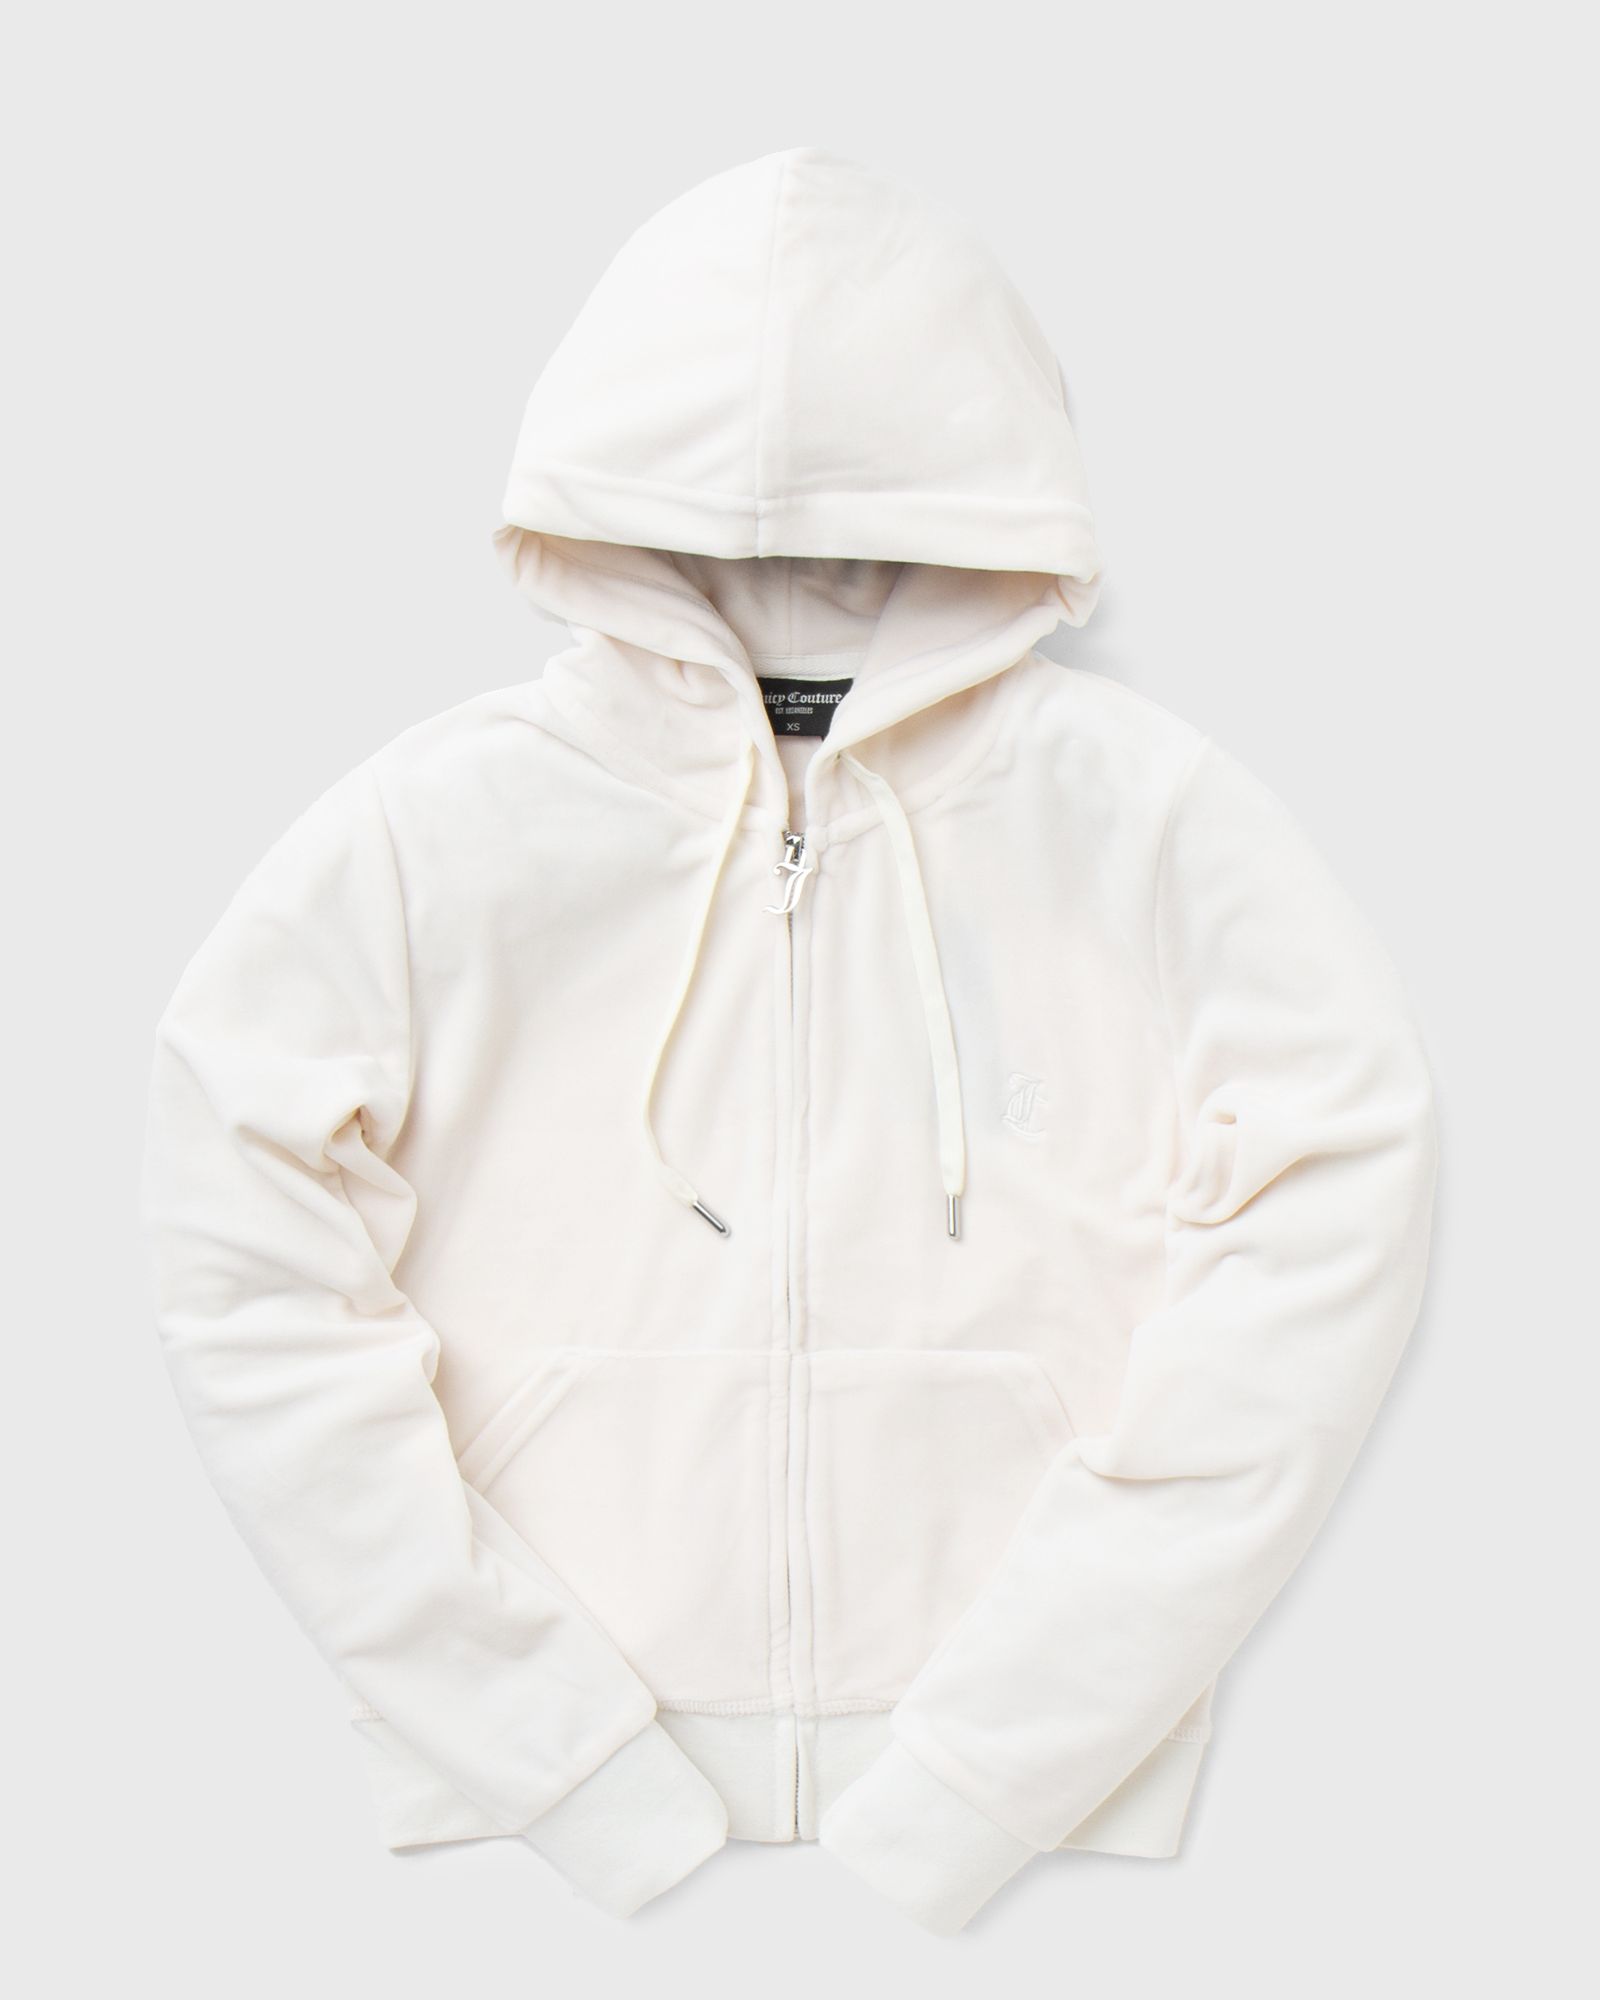 Juicy Couture - classic velour robertson zip hoodie women track jackets|zippers white in größe:m